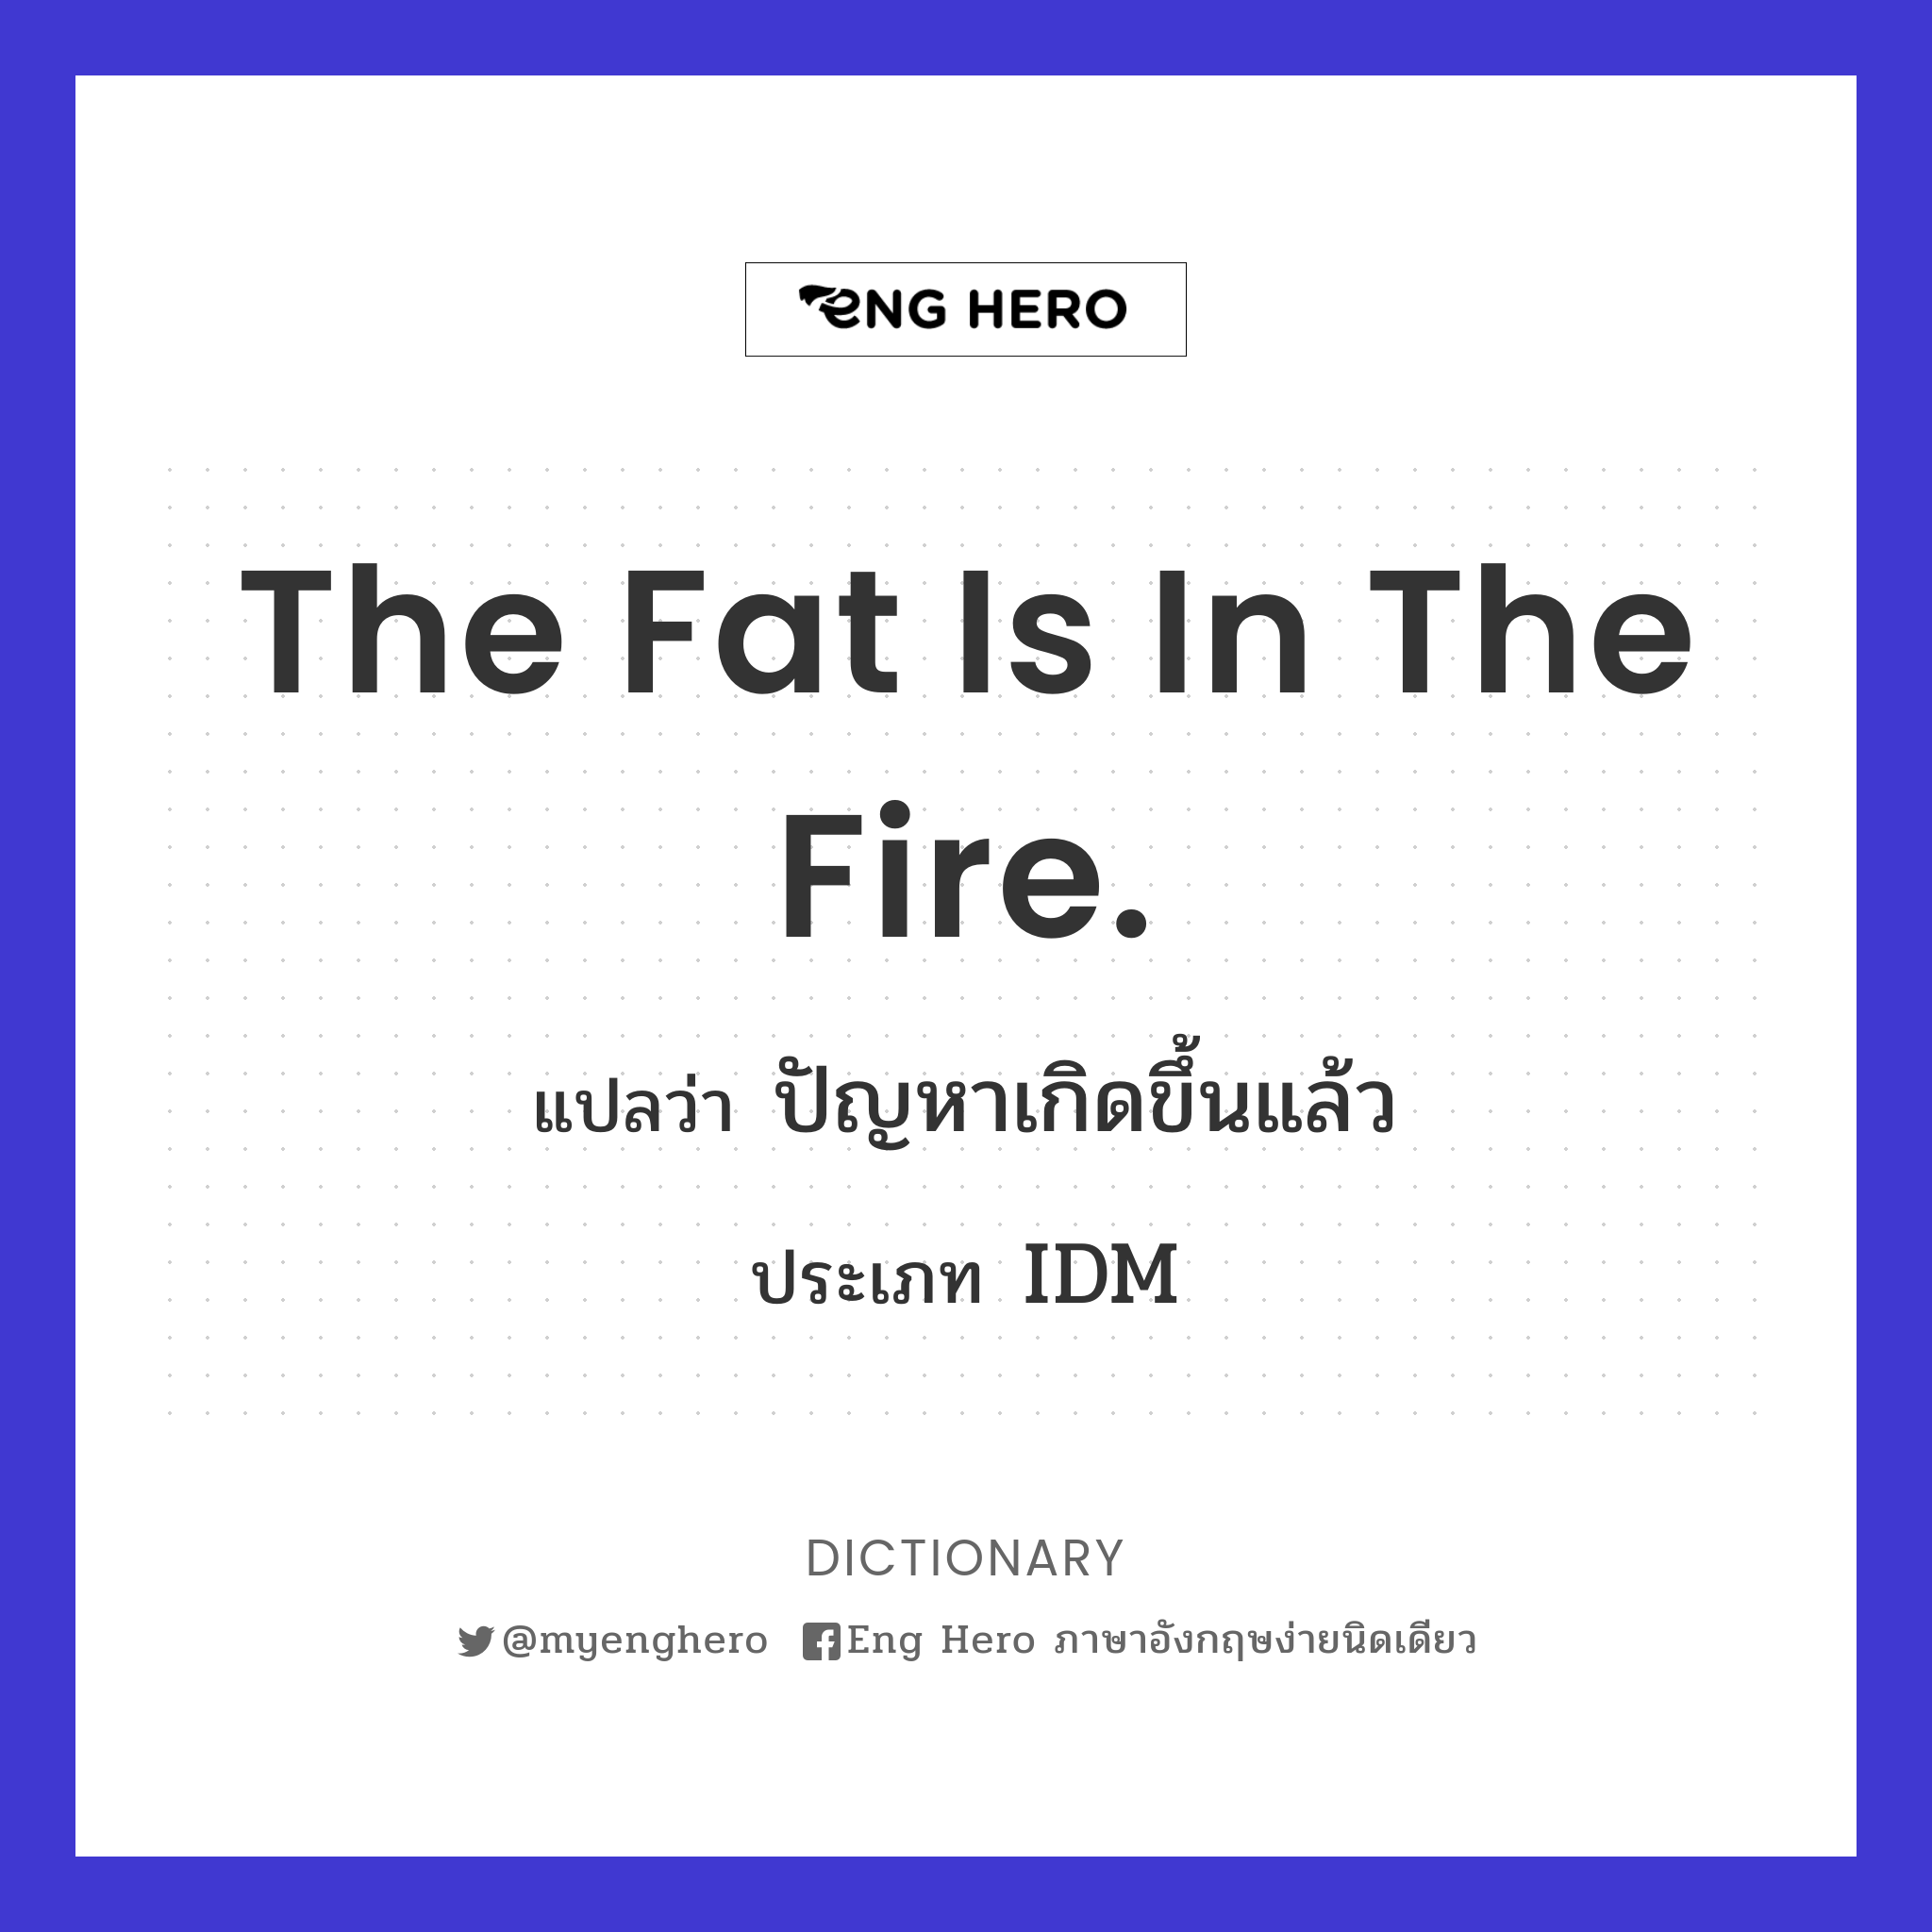 The fat is in the fire.